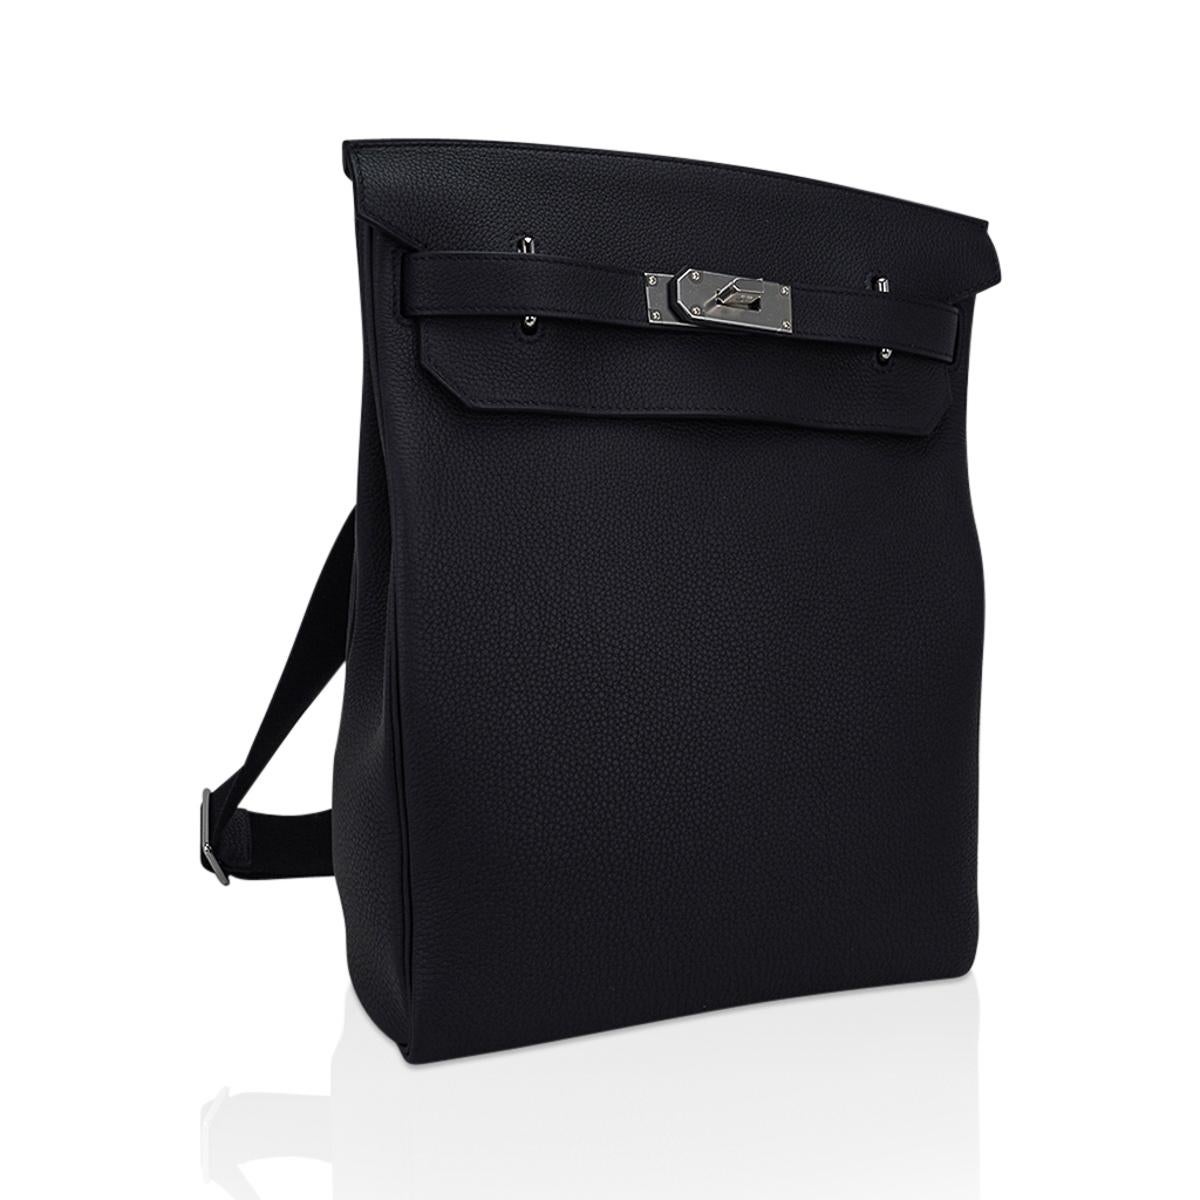 Mightychic offers a men's  Hermes Hac a Dos GM Backpack featured in Black Togo calfskin.
Bag has an adjustable shoulder strap.
Palladium plated hardware and D-ring.
Large interior compartment with interior back pocket.
D-ring and palladium plated